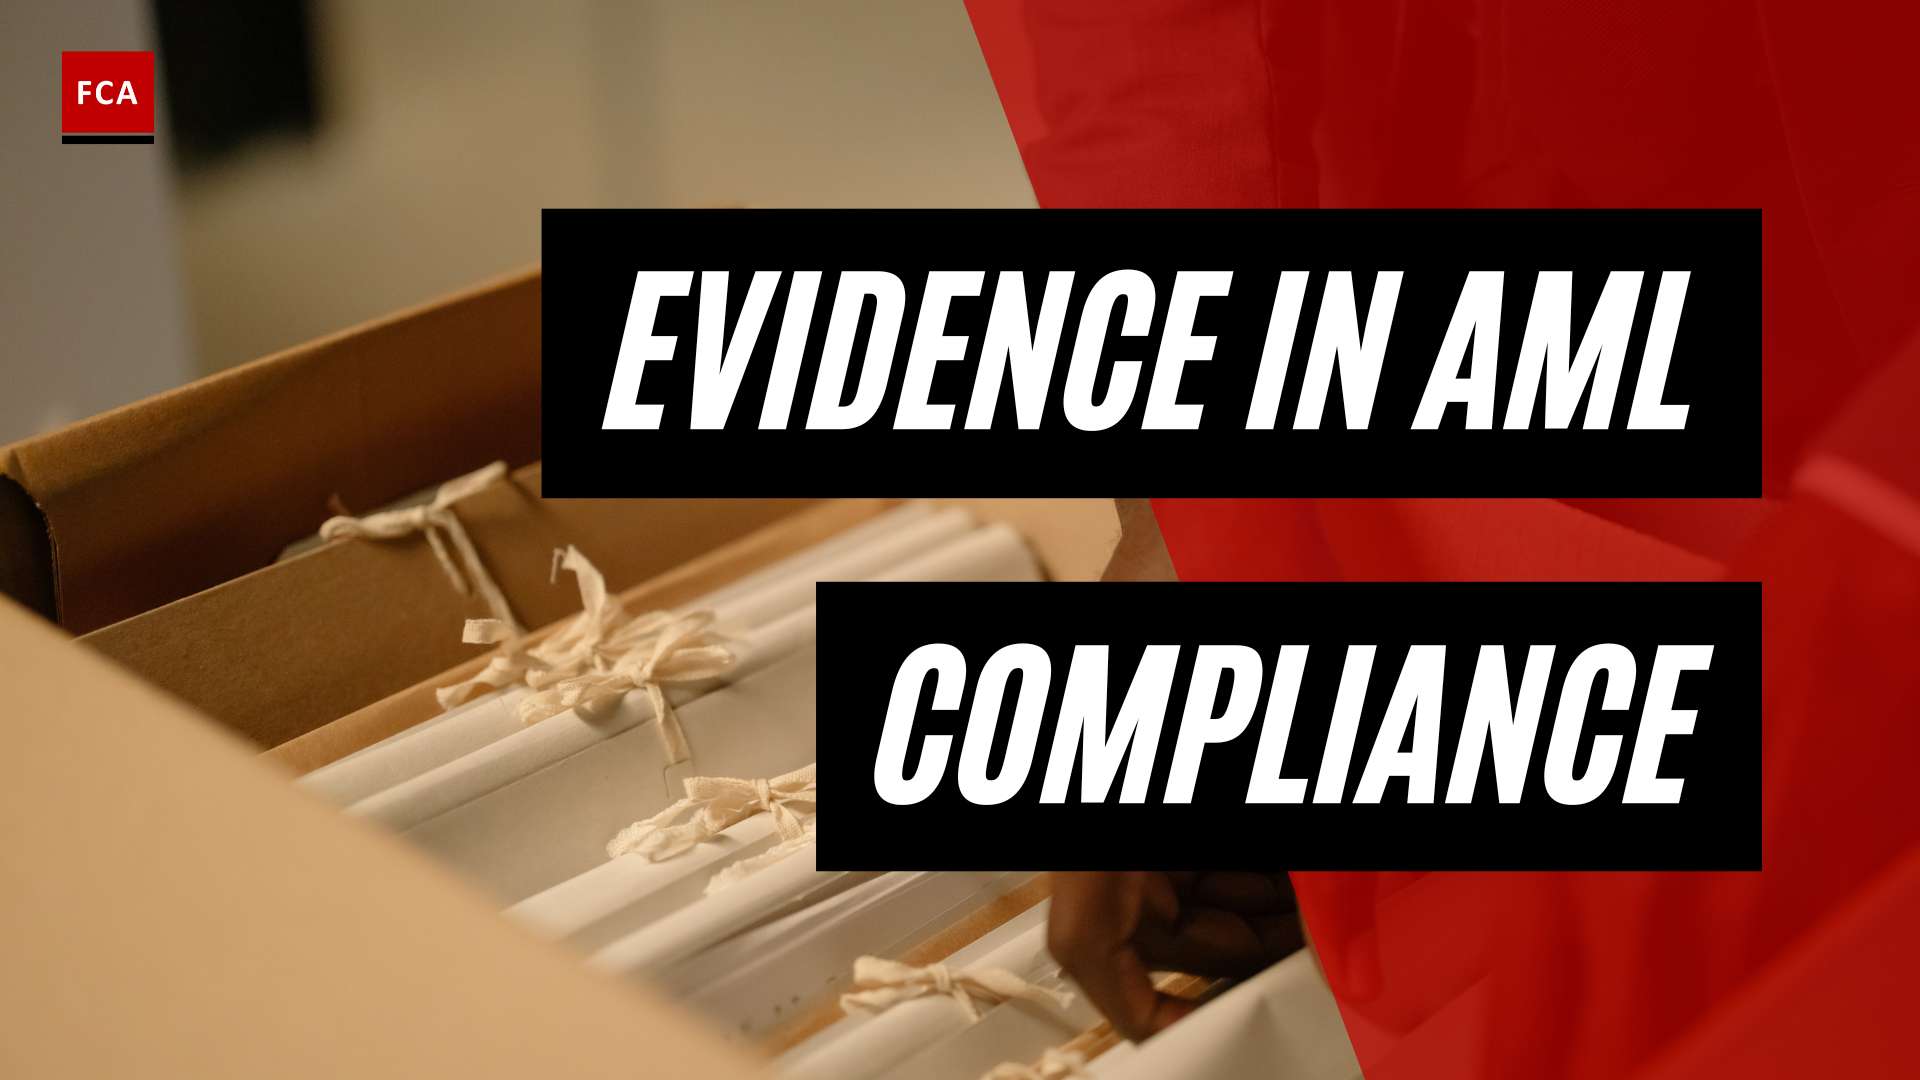 The Power Of Evidence: Aml Case Studies Reinforcing The Need For Compliance